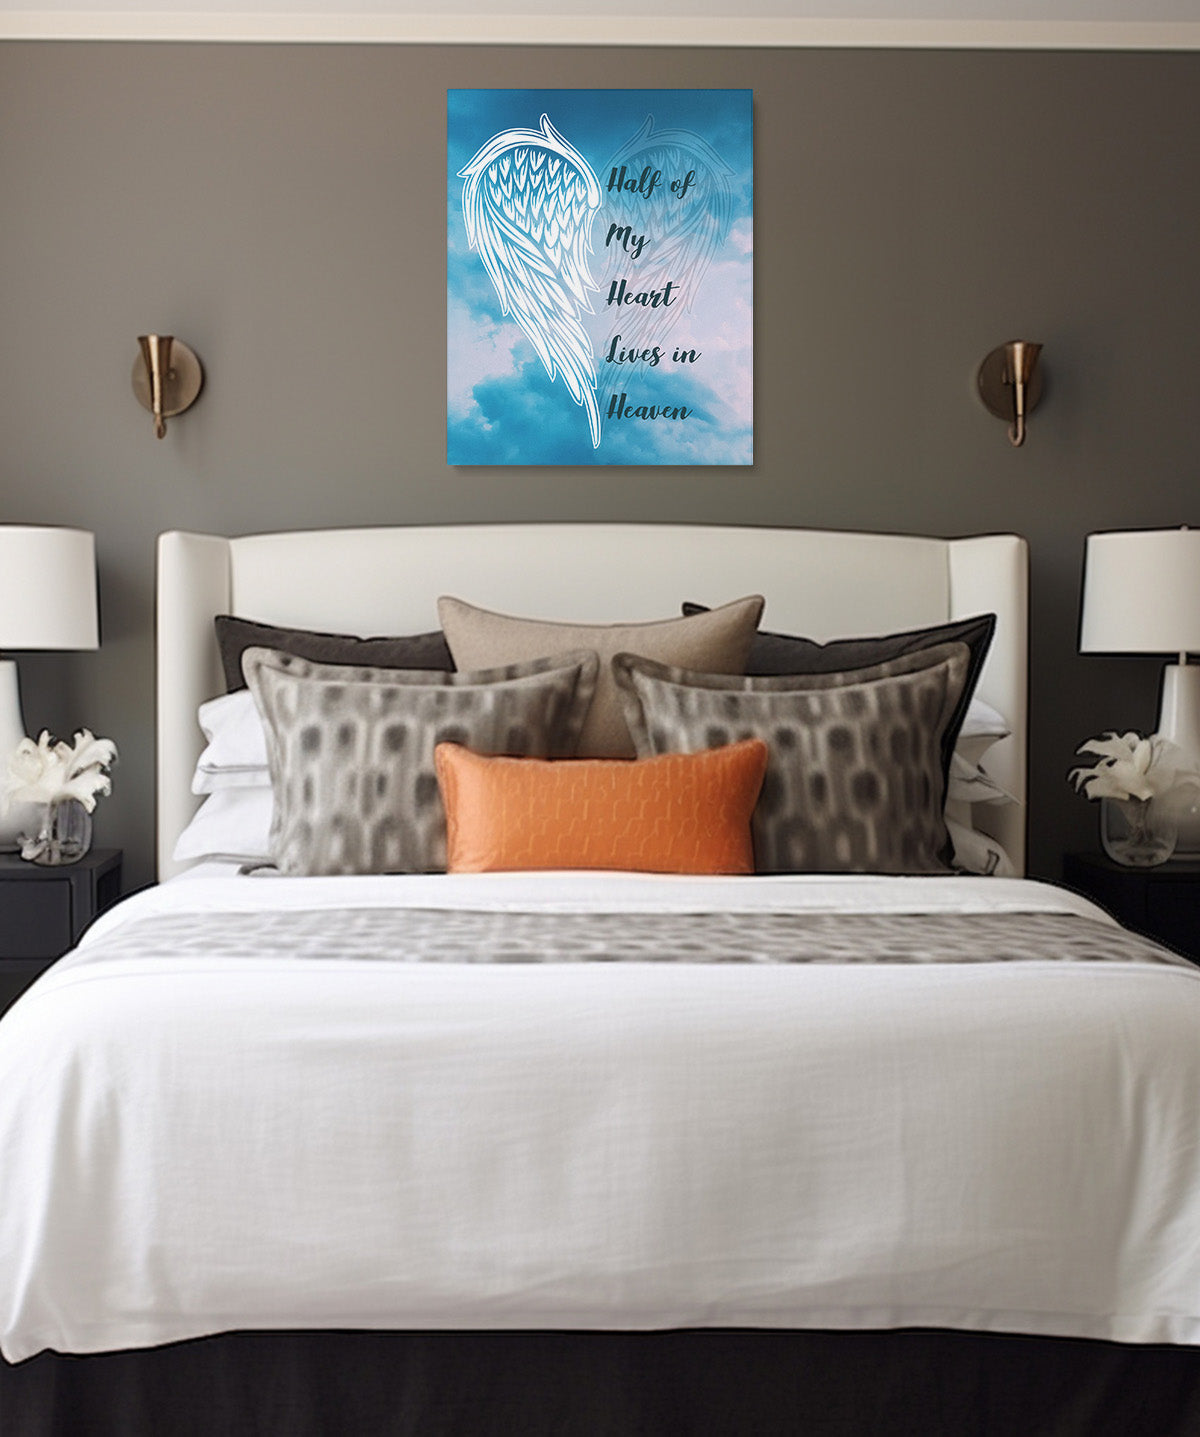 Half Of My Heart Lives In Heaven - Wall Decor Art Print with a sky background - artwork printed on canvas